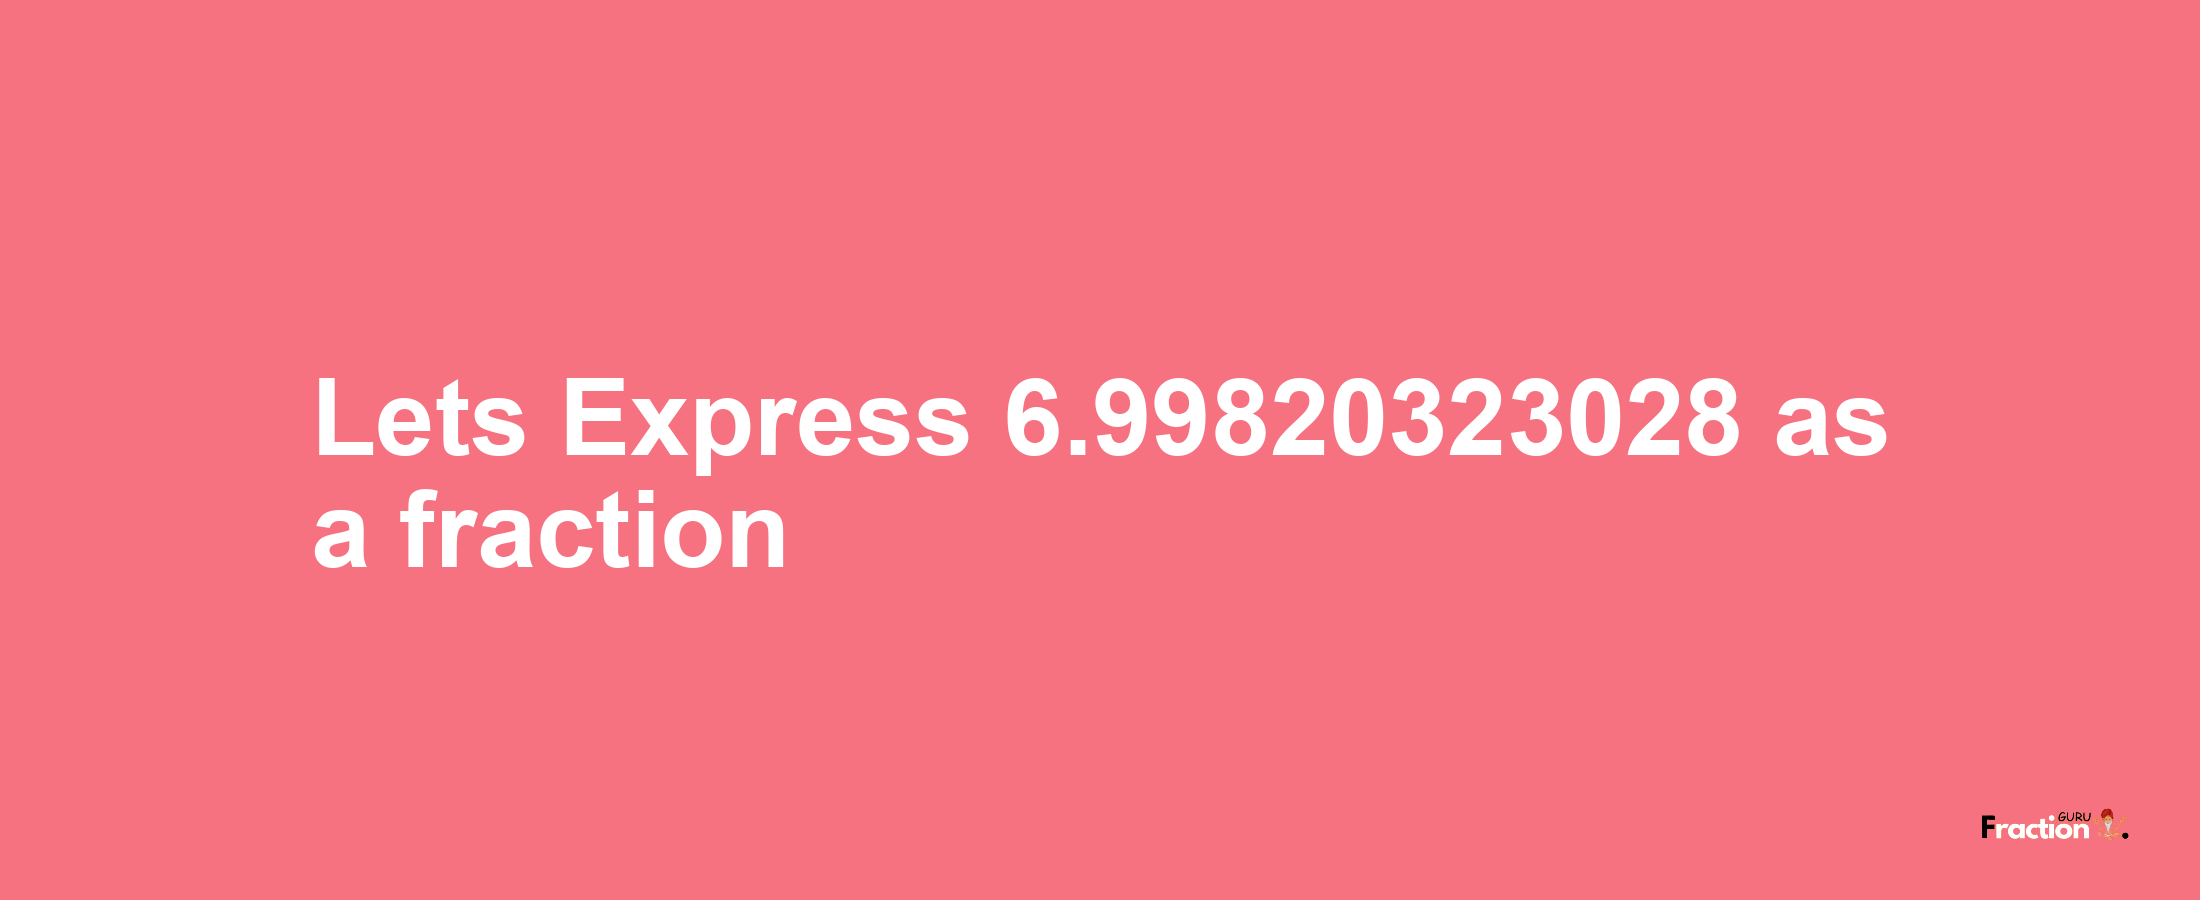 Lets Express 6.99820323028 as afraction